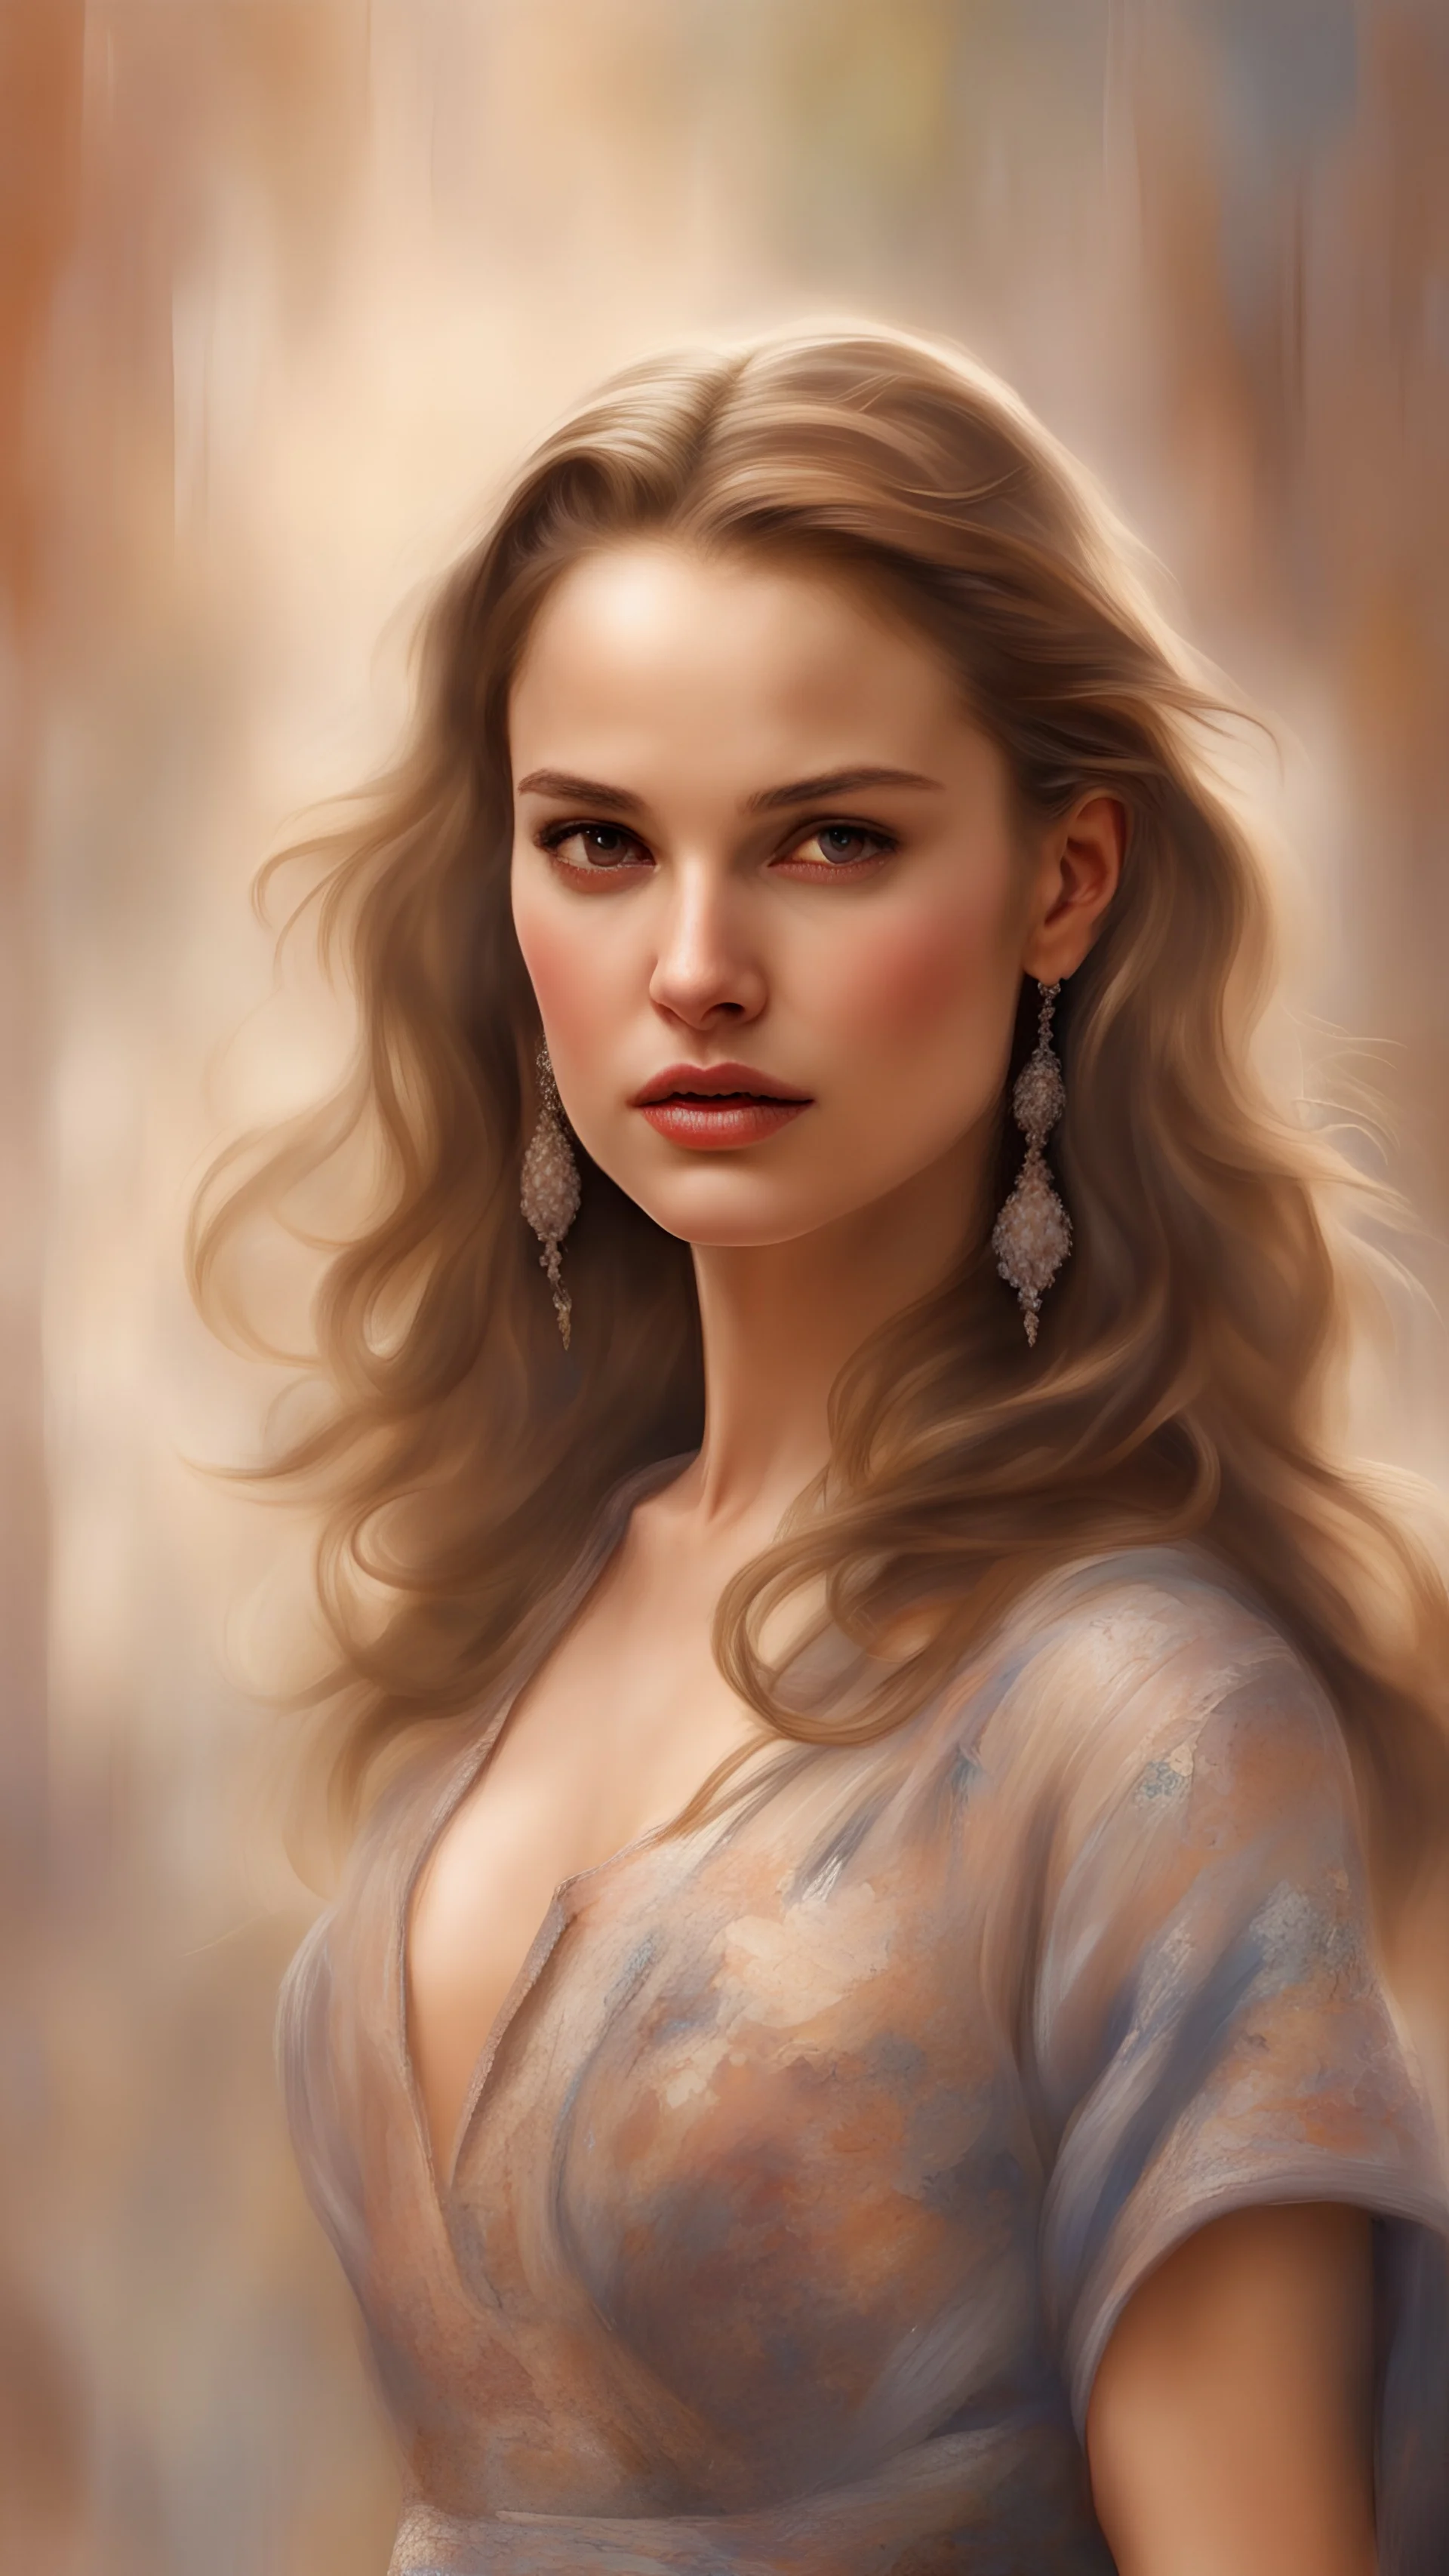 Natalie Portman style, a perfectly beautiful figure, a light lipstick, a round big chest, stand upright and look straight ahead, a semi-realistic image, beautifull face, beautifull look, impressionist style Razumov Style, detailed clothing, beautiful face, intricate artwork masterpiece, high quality model